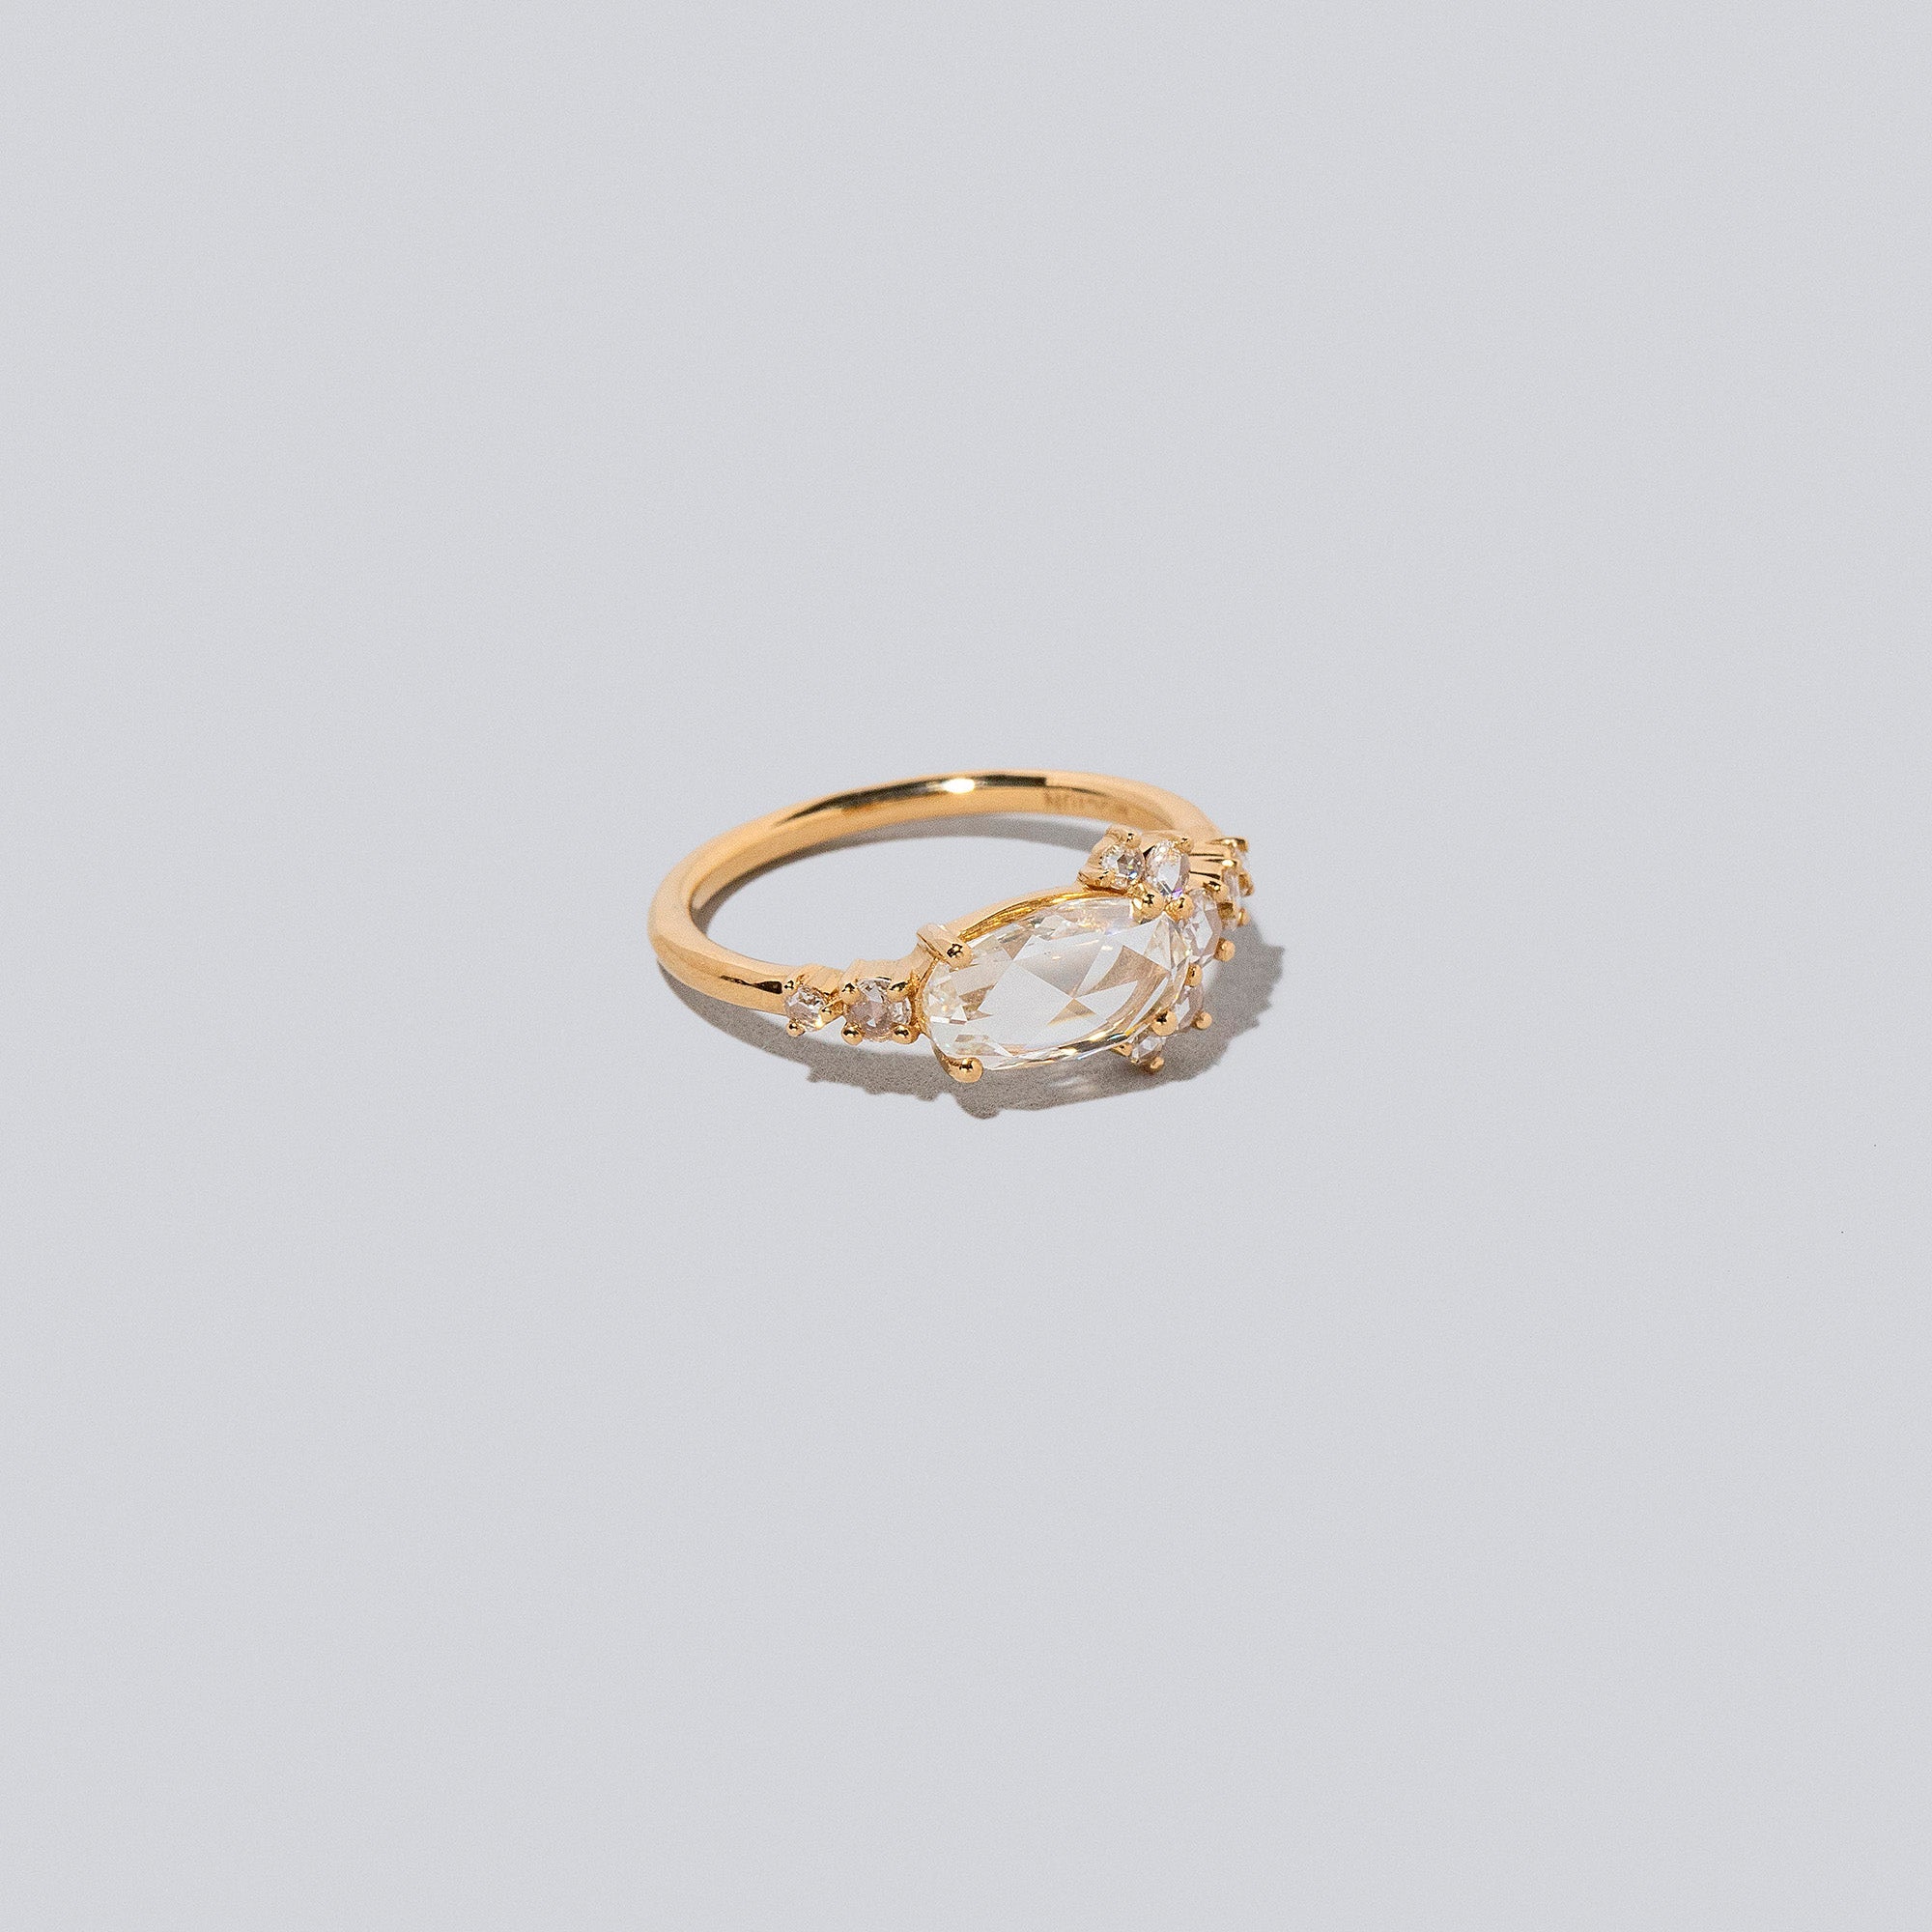 product_details:: Midori Rings on light color background.